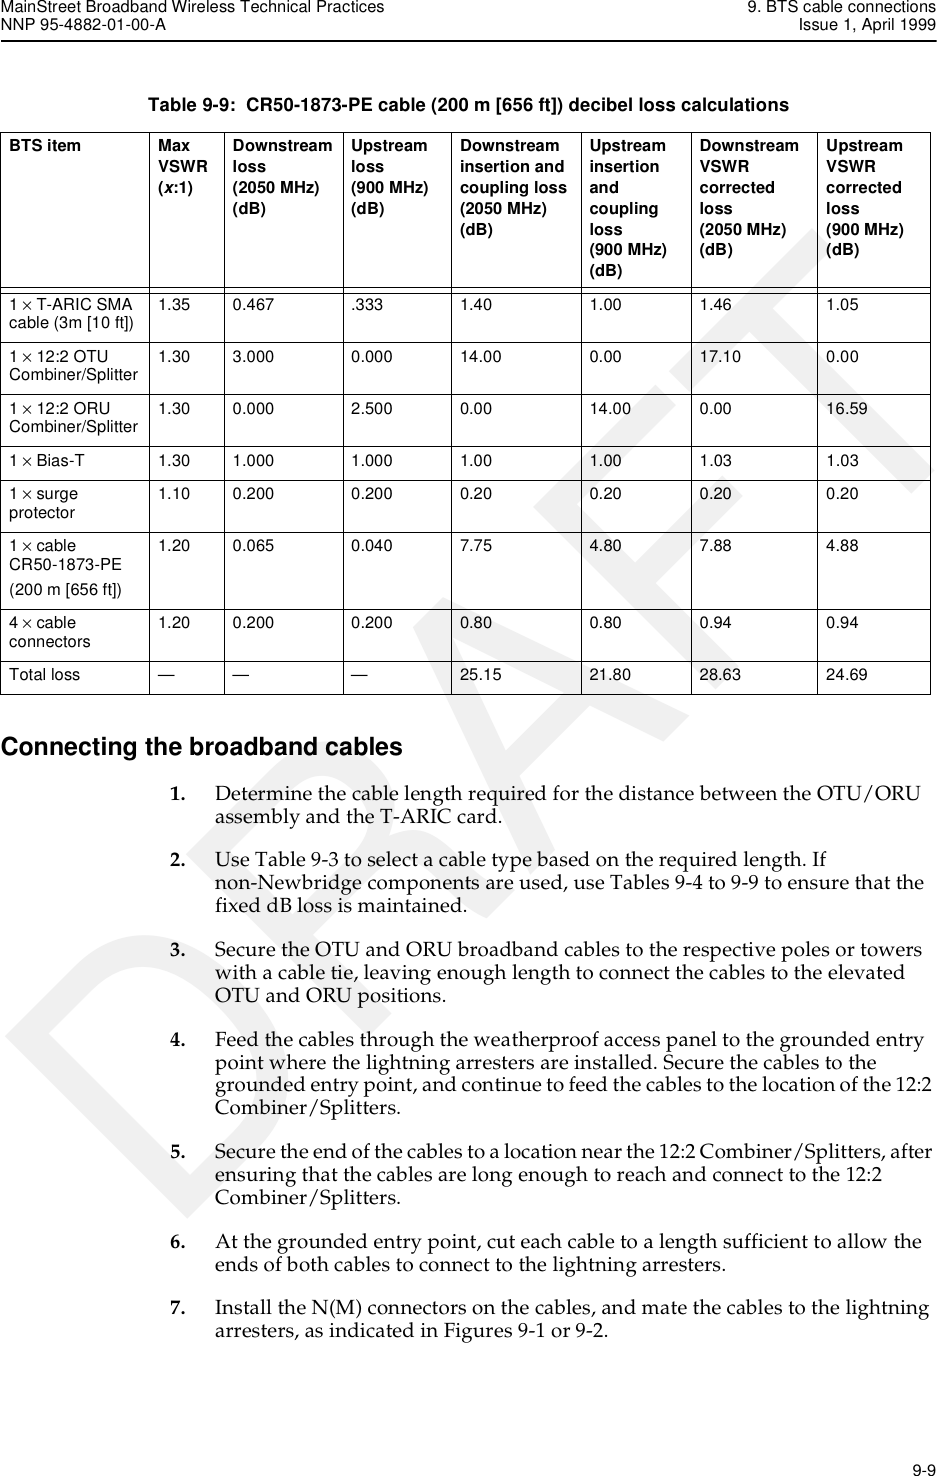 MainStreet Broadband Wireless Technical Practices 9. BTS cable connectionsNNP 95-4882-01-00-A Issue 1, April 1999   9-9DRAFTTable 9-9:  CR50-1873-PE cable (200 m [656 ft]) decibel loss calculationsConnecting the broadband cables1. Determine the cable length required for the distance between the OTU/ORU assembly and the T-ARIC card.2. Use Table 9-3 to select a cable type based on the required length. If non-Newbridge components are used, use Tables 9-4 to 9-9 to ensure that the fixed dB loss is maintained.3. Secure the OTU and ORU broadband cables to the respective poles or towers with a cable tie, leaving enough length to connect the cables to the elevated OTU and ORU positions.4. Feed the cables through the weatherproof access panel to the grounded entry point where the lightning arresters are installed. Secure the cables to the grounded entry point, and continue to feed the cables to the location of the 12:2 Combiner/Splitters.5. Secure the end of the cables to a location near the 12:2 Combiner/Splitters, after ensuring that the cables are long enough to reach and connect to the 12:2 Combiner/Splitters.6. At the grounded entry point, cut each cable to a length sufficient to allow the ends of both cables to connect to the lightning arresters.7. Install the N(M) connectors on the cables, and mate the cables to the lightning arresters, as indicated in Figures 9-1 or 9-2.BTS item MaxVSWR (x:1)Downstreamloss(2050 MHz)(dB)Upstreamloss(900 MHz)(dB)Downstreaminsertion andcoupling loss(2050 MHz)(dB)Upstreaminsertion andcoupling loss(900 MHz)(dB)DownstreamVSWR correctedloss (2050 MHz)(dB)UpstreamVSWR correctedloss (900 MHz)(dB)1 × T-ARIC SMA cable (3m [10 ft]) 1.35 0.467 .333 1.40 1.00 1.46 1.051 × 12:2 OTU Combiner/Splitter 1.30 3.000 0.000 14.00 0.00 17.10 0.001 × 12:2 ORU Combiner/Splitter 1.30 0.000 2.500 0.00 14.00 0.00 16.591 × Bias-T 1.30 1.000 1.000 1.00 1.00 1.03 1.031 × surge protector 1.10 0.200 0.200 0.20 0.20 0.20 0.201 × cable CR50-1873-PE(200 m [656 ft])1.20 0.065 0.040 7.75 4.80 7.88 4.884 × cable connectors 1.20 0.200 0.200 0.80 0.80 0.94 0.94Total loss — — — 25.15 21.80 28.63 24.69